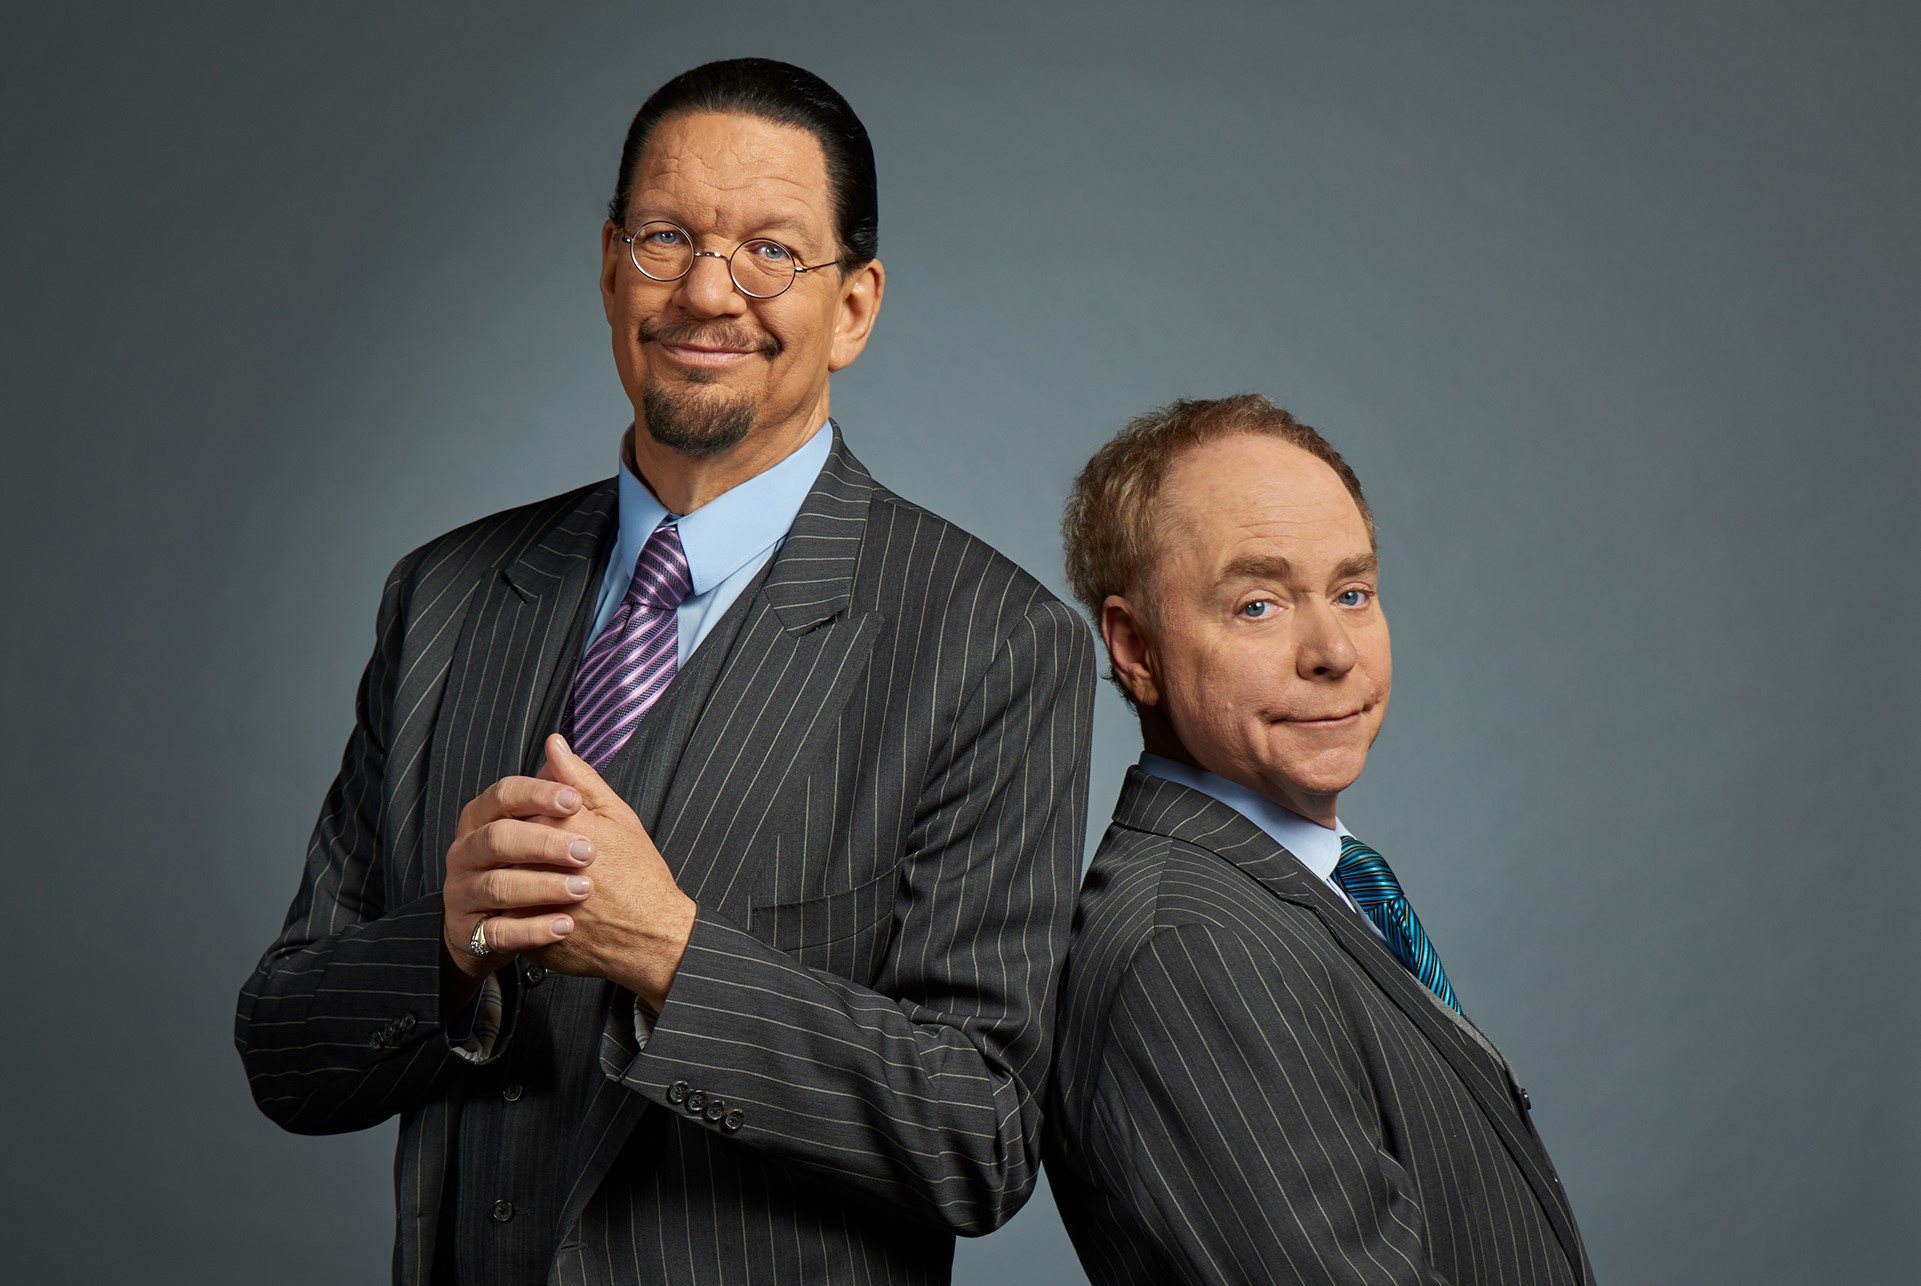 22-mind-blowing-facts-about-penn-and-teller